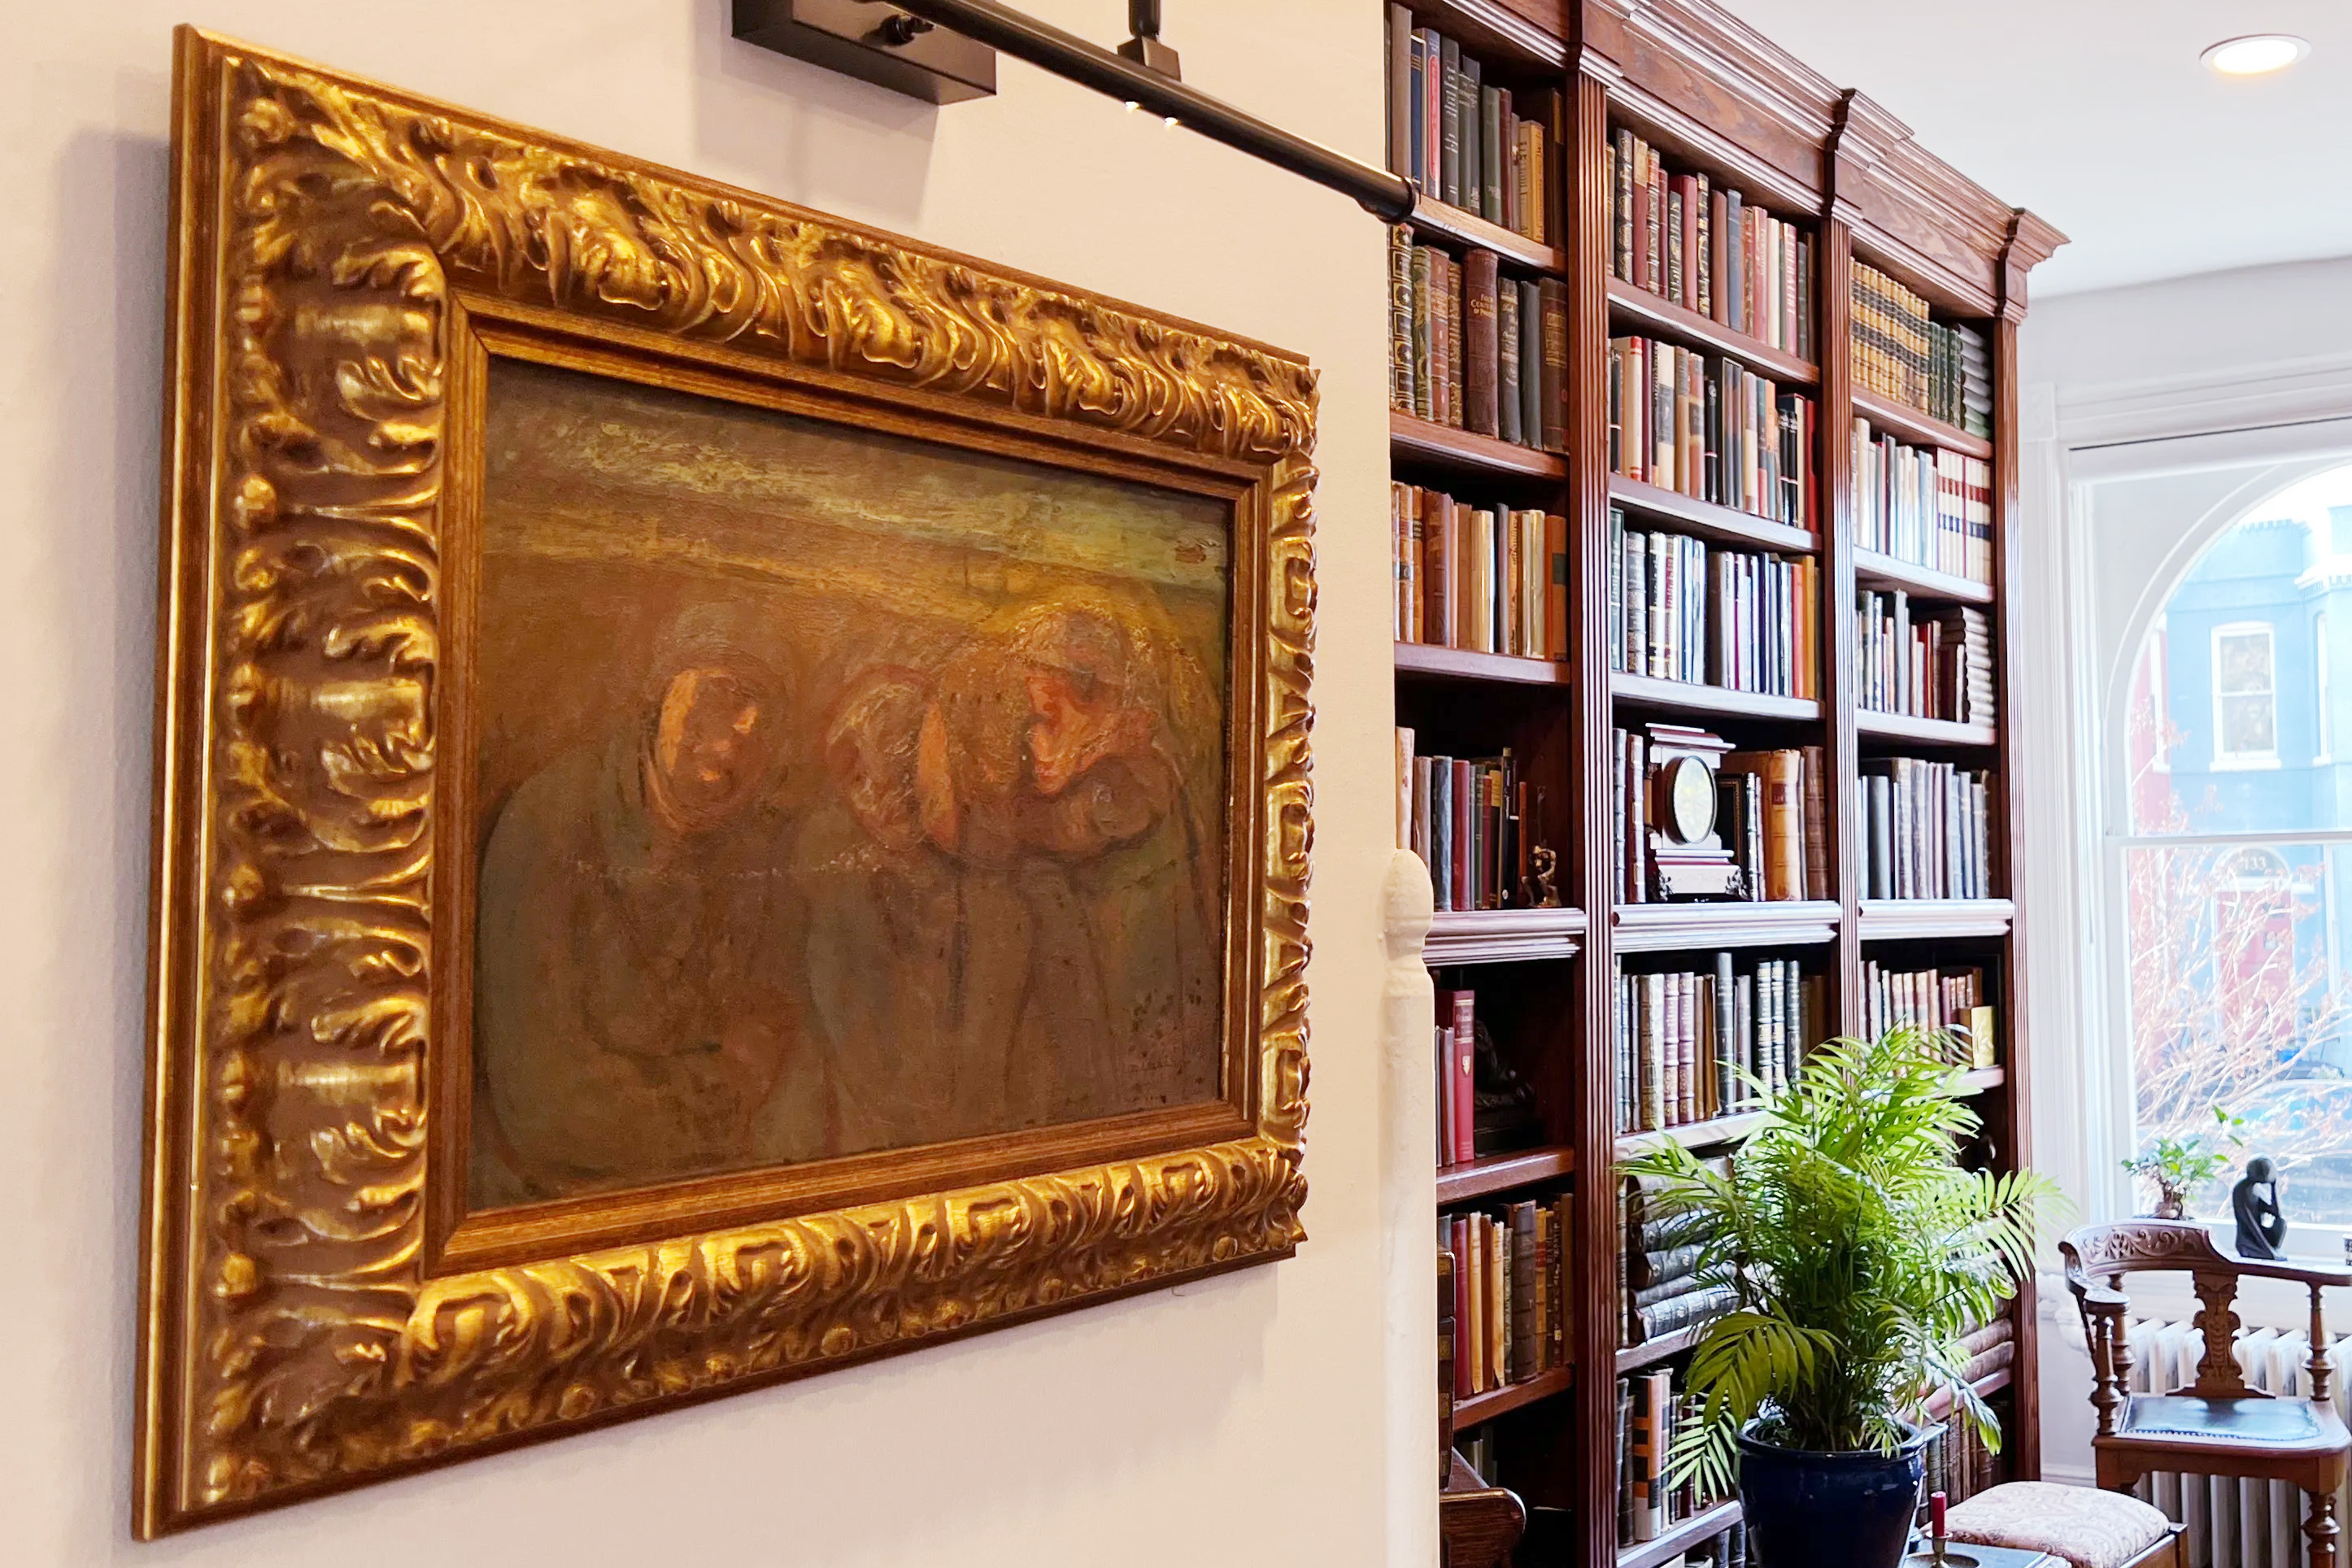 A classic painting in a gilded frame beside a bookshelf-lined wall in a cozy room with a plant and window.